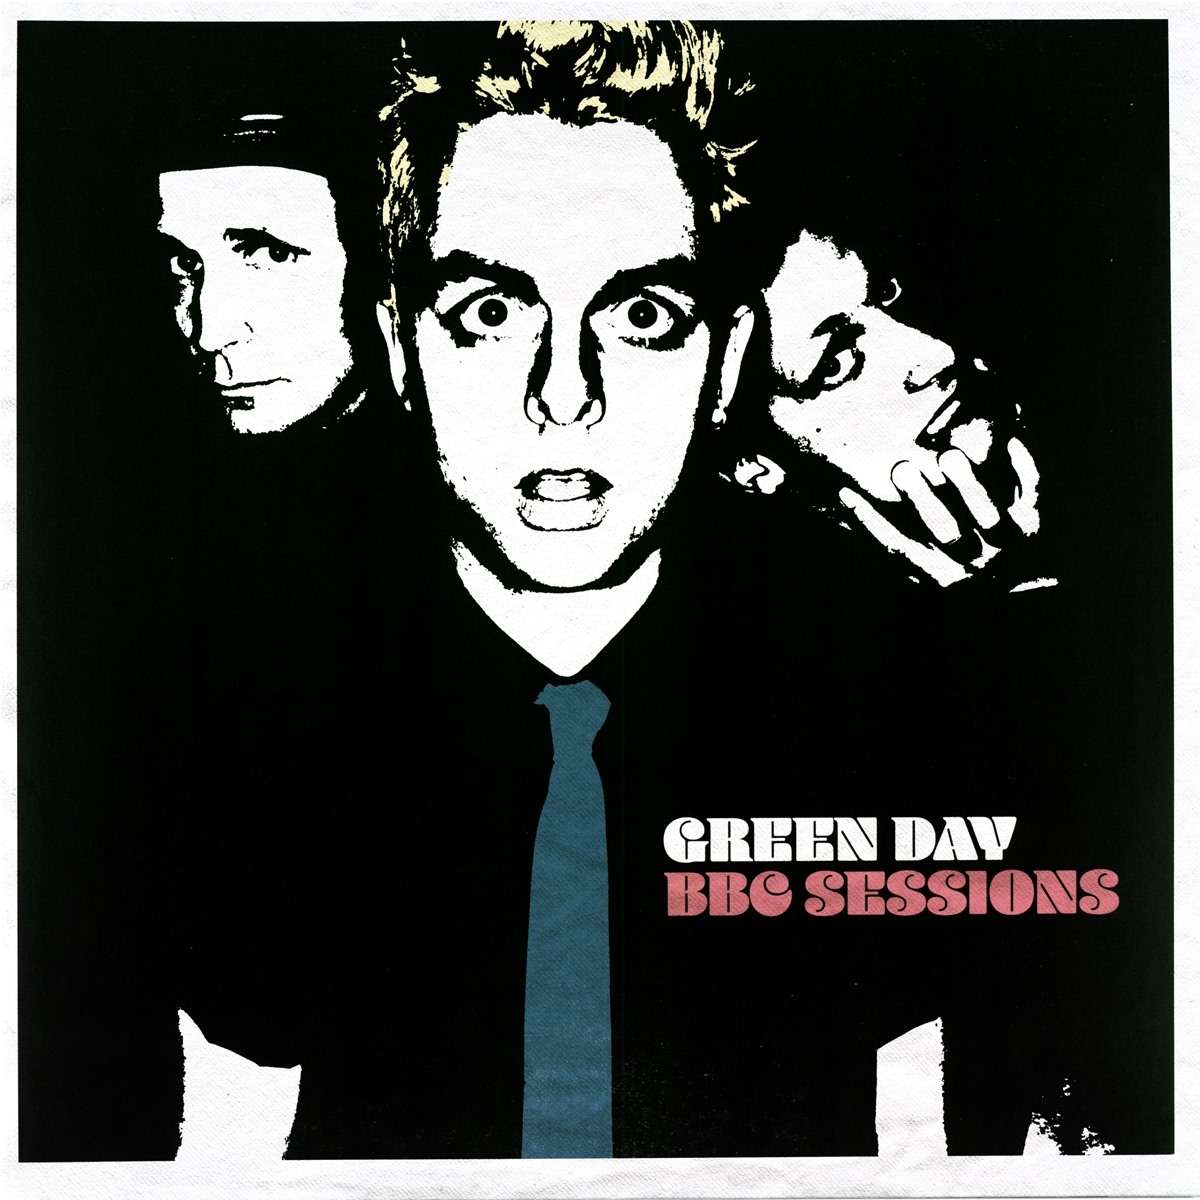 Green Day - BBC Sessions  